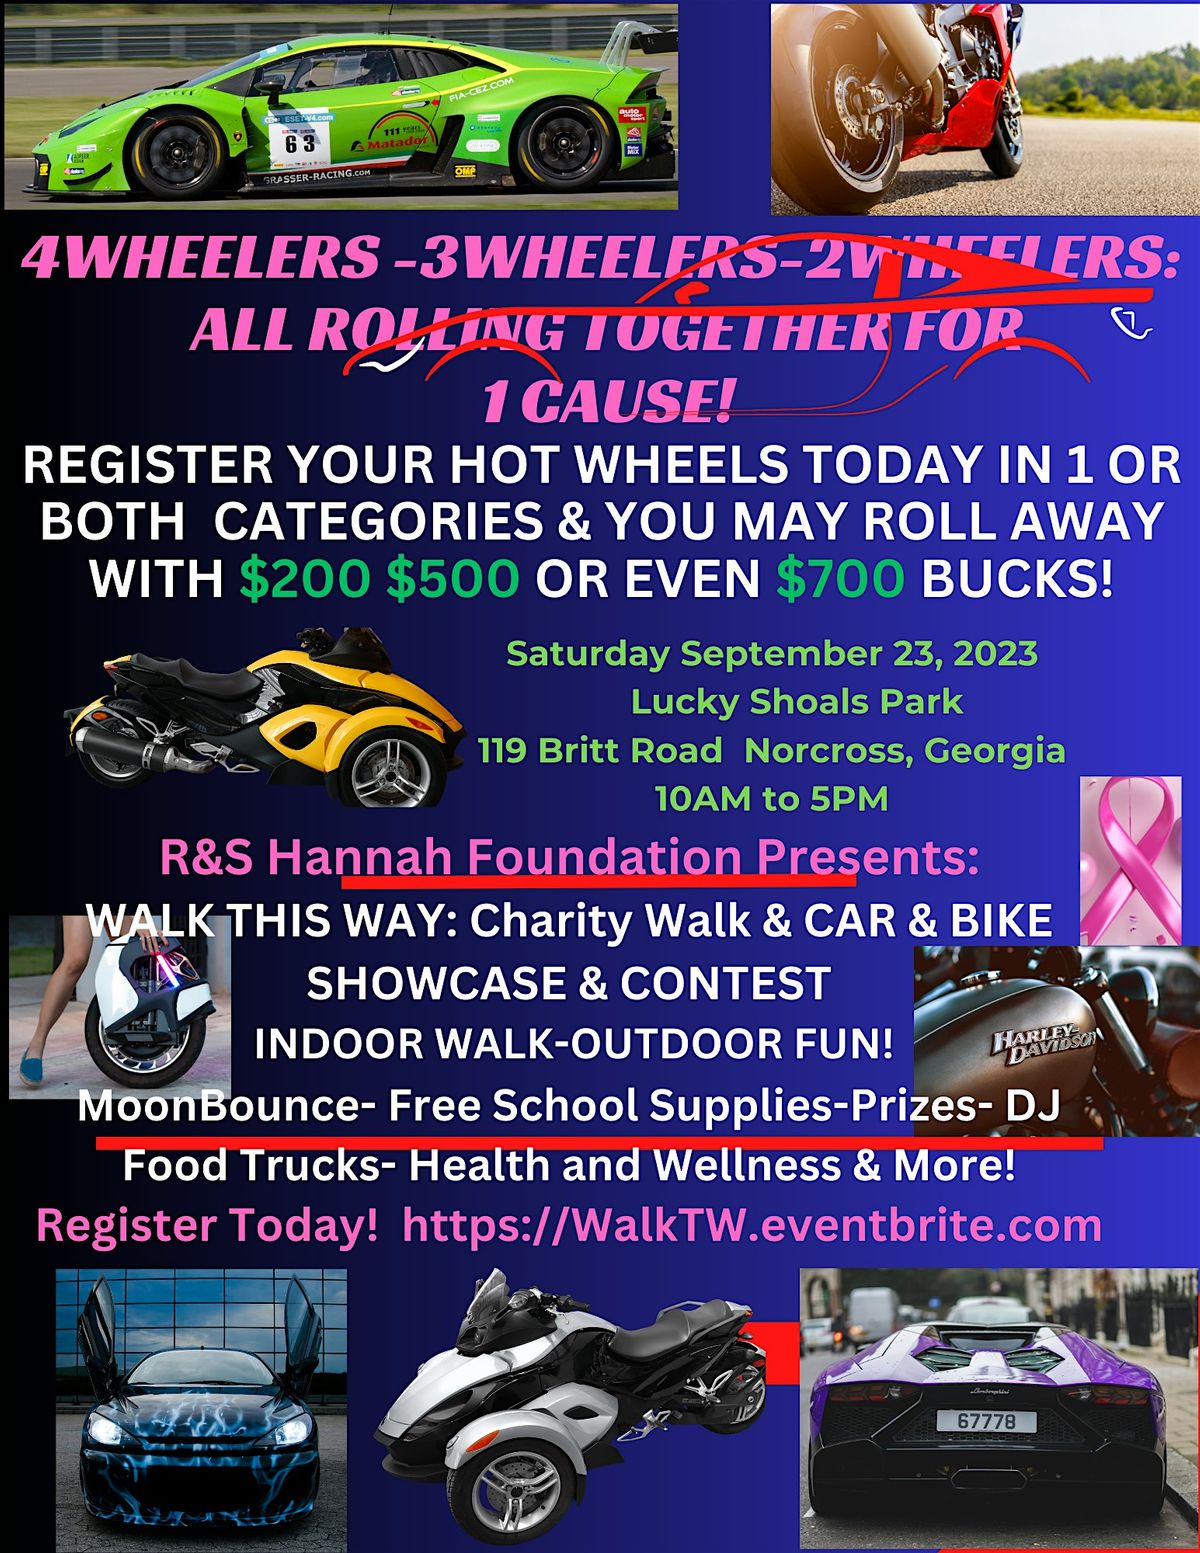 Walk This Way!  Car and Bike showcase and Contest